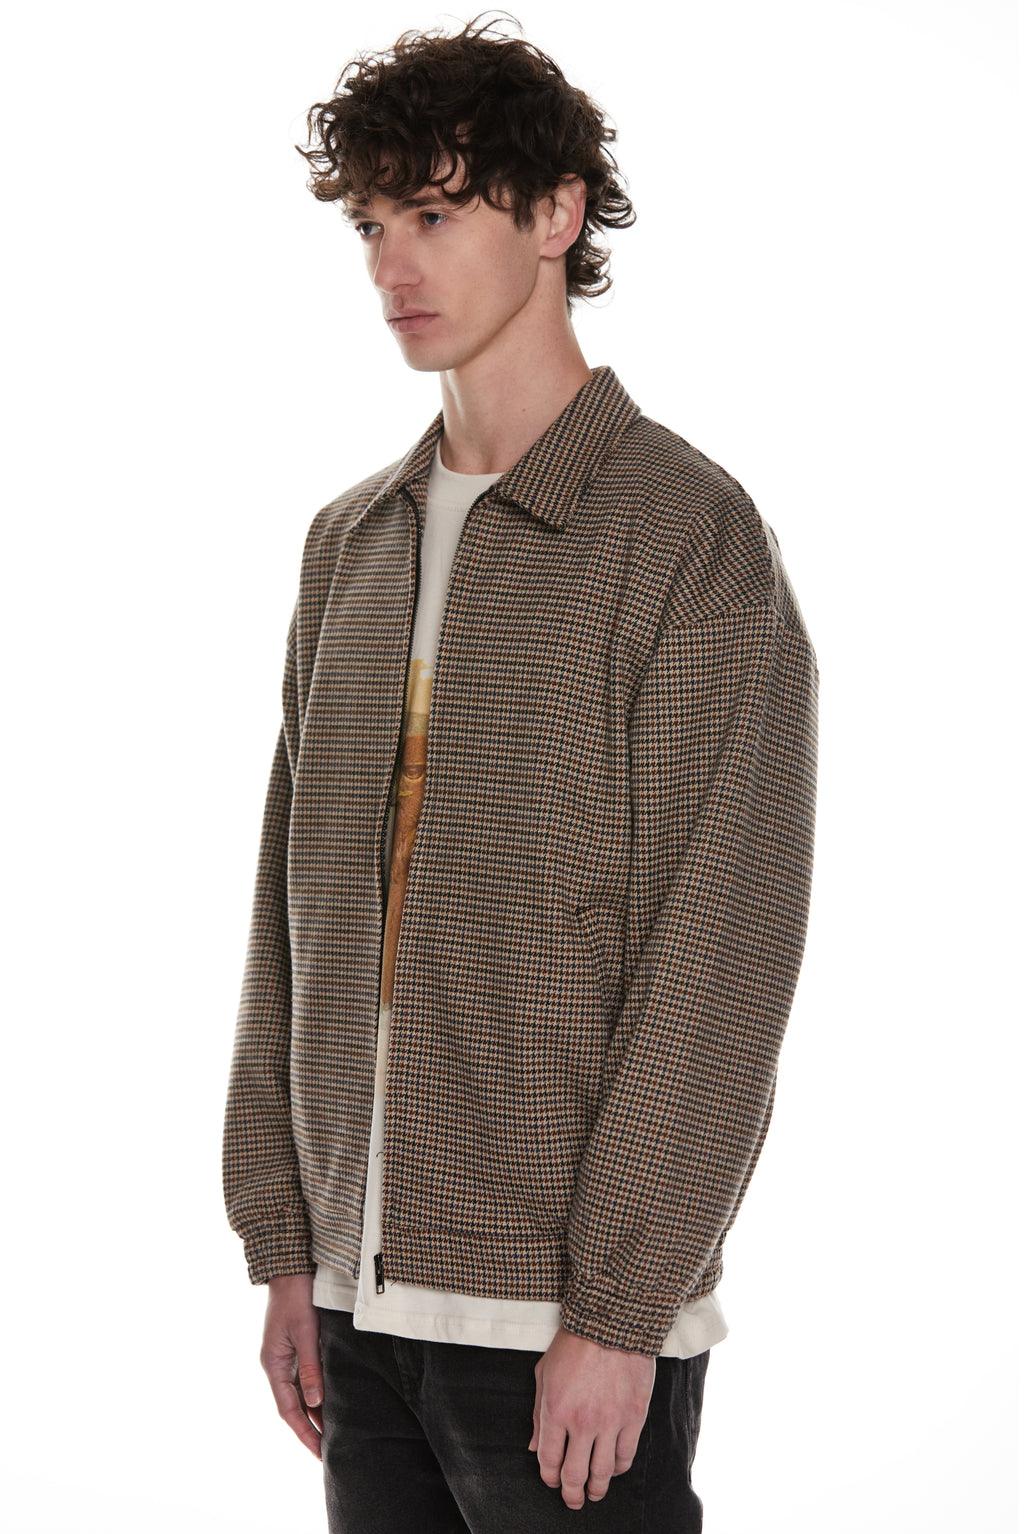 Checkered Jacket - Olive/Brown